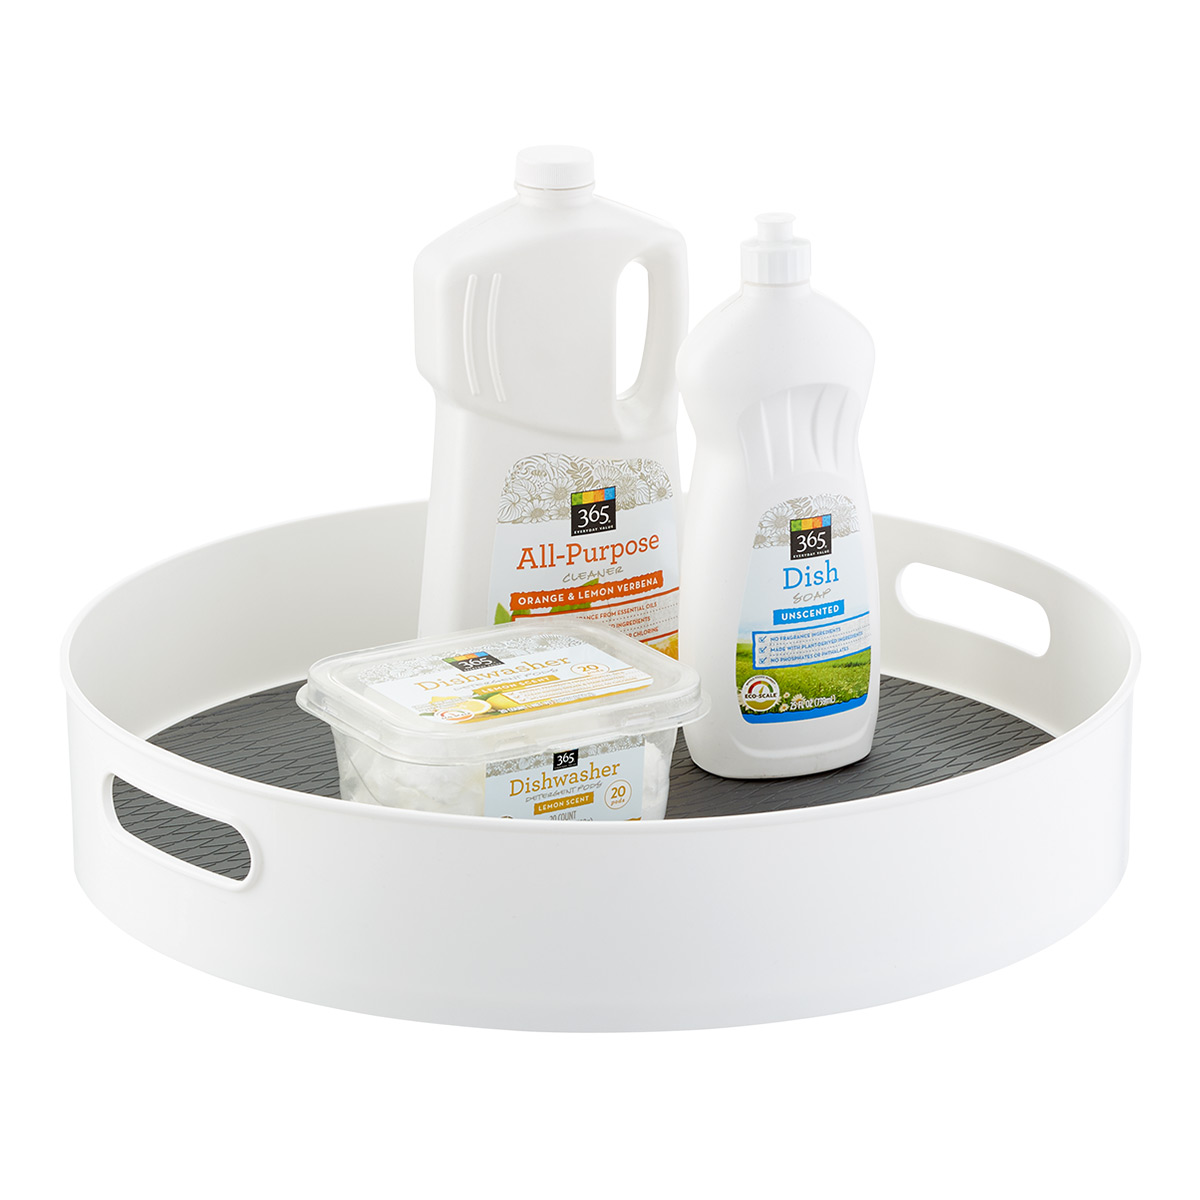 https://www.containerstore.com/catalogimages/351353/10075733-undersink-turntable-18in-wh.jpg